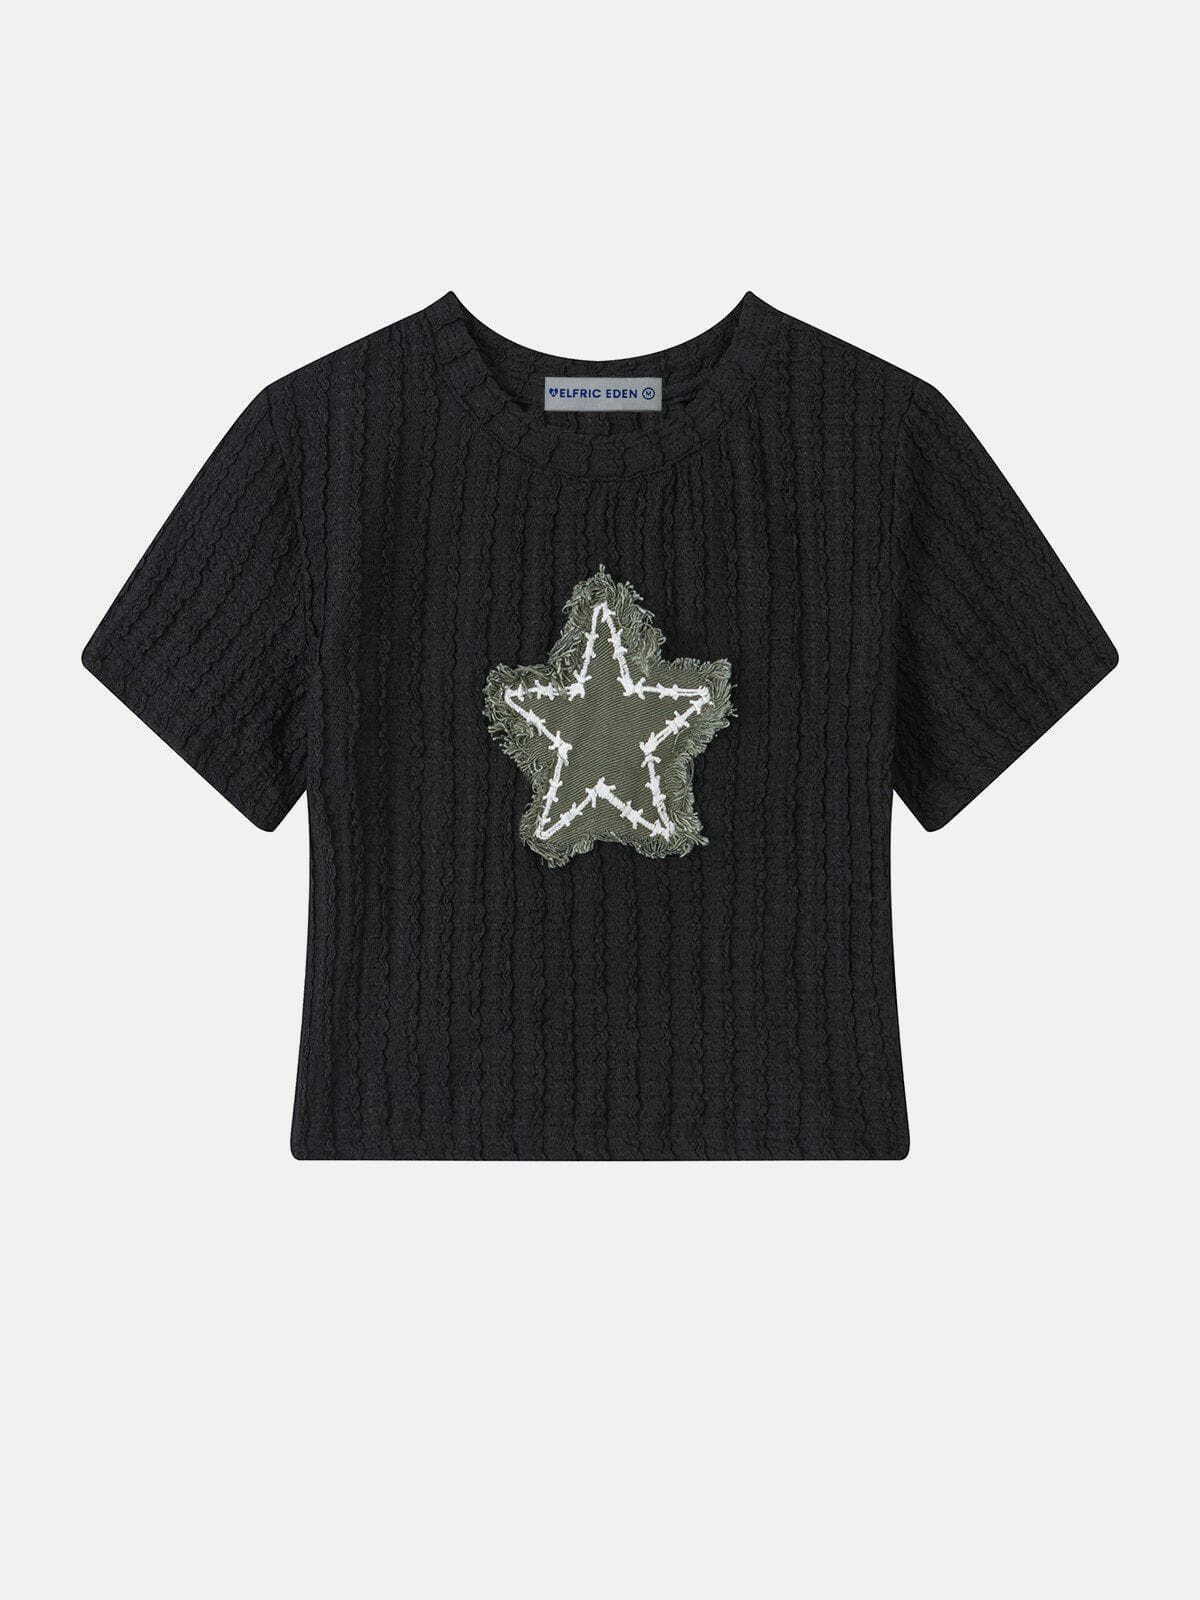 thorny star embroidered tee edgy streetwear 4886